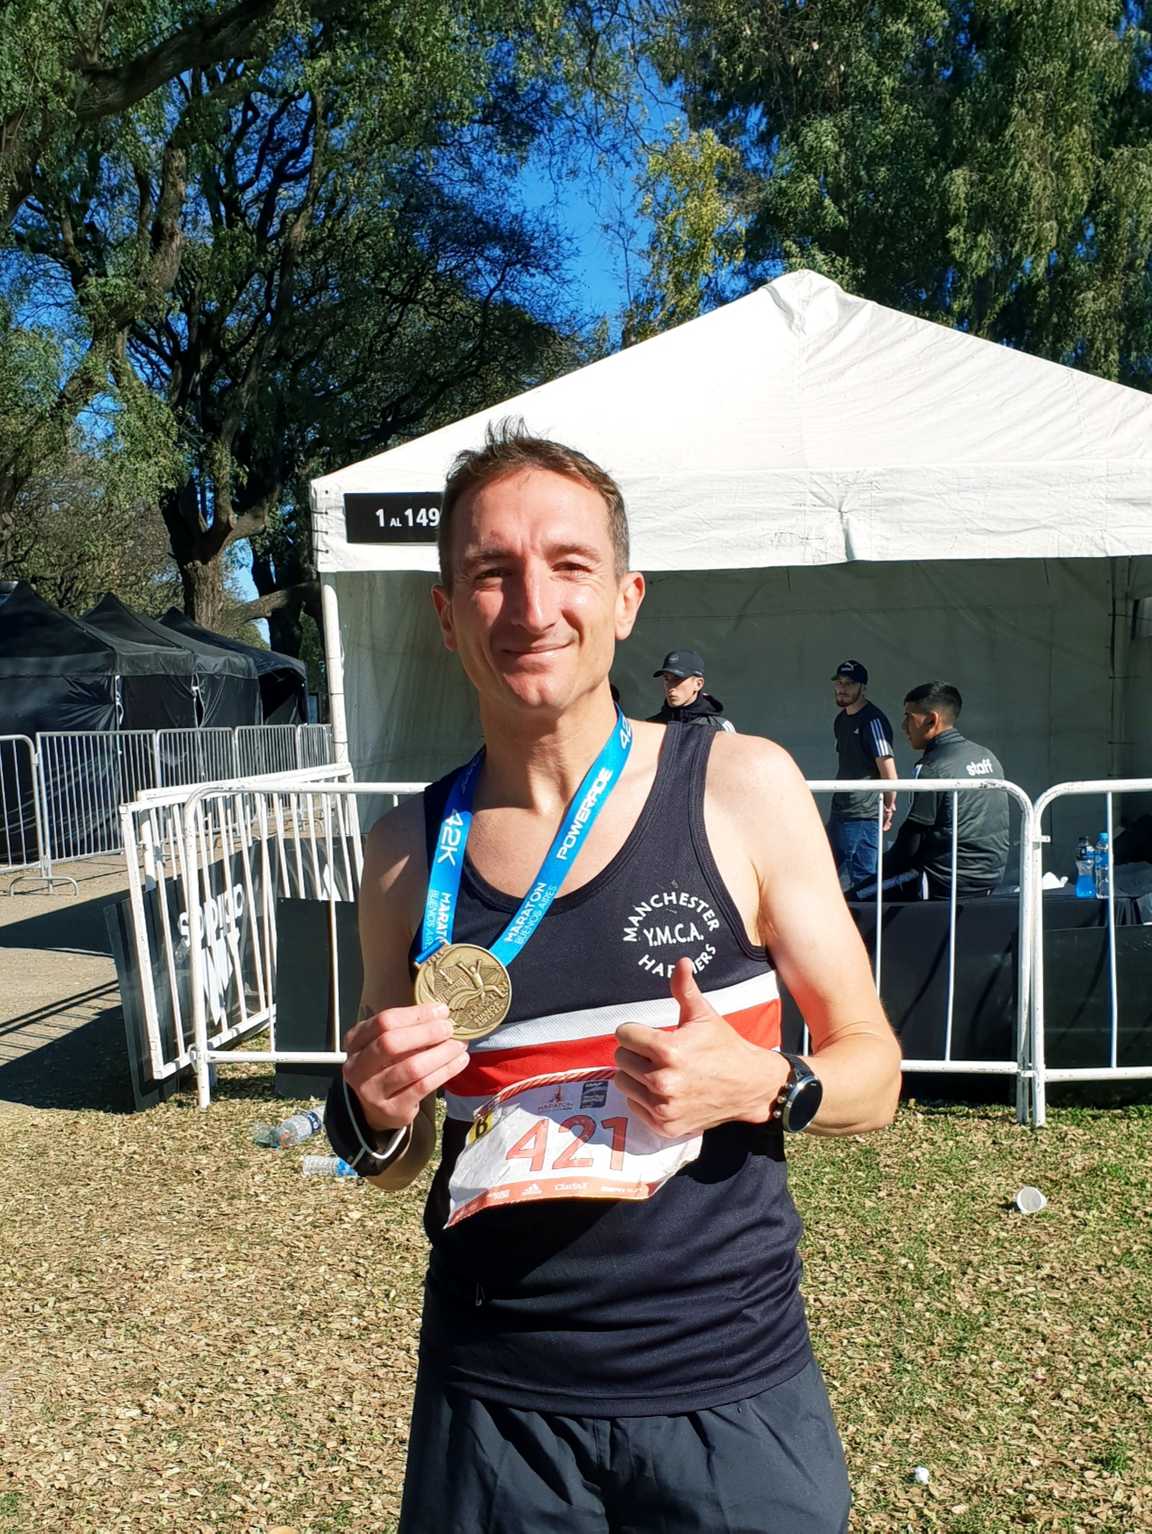 Craig Jones with his Buenos Aires marathon finisher's medal